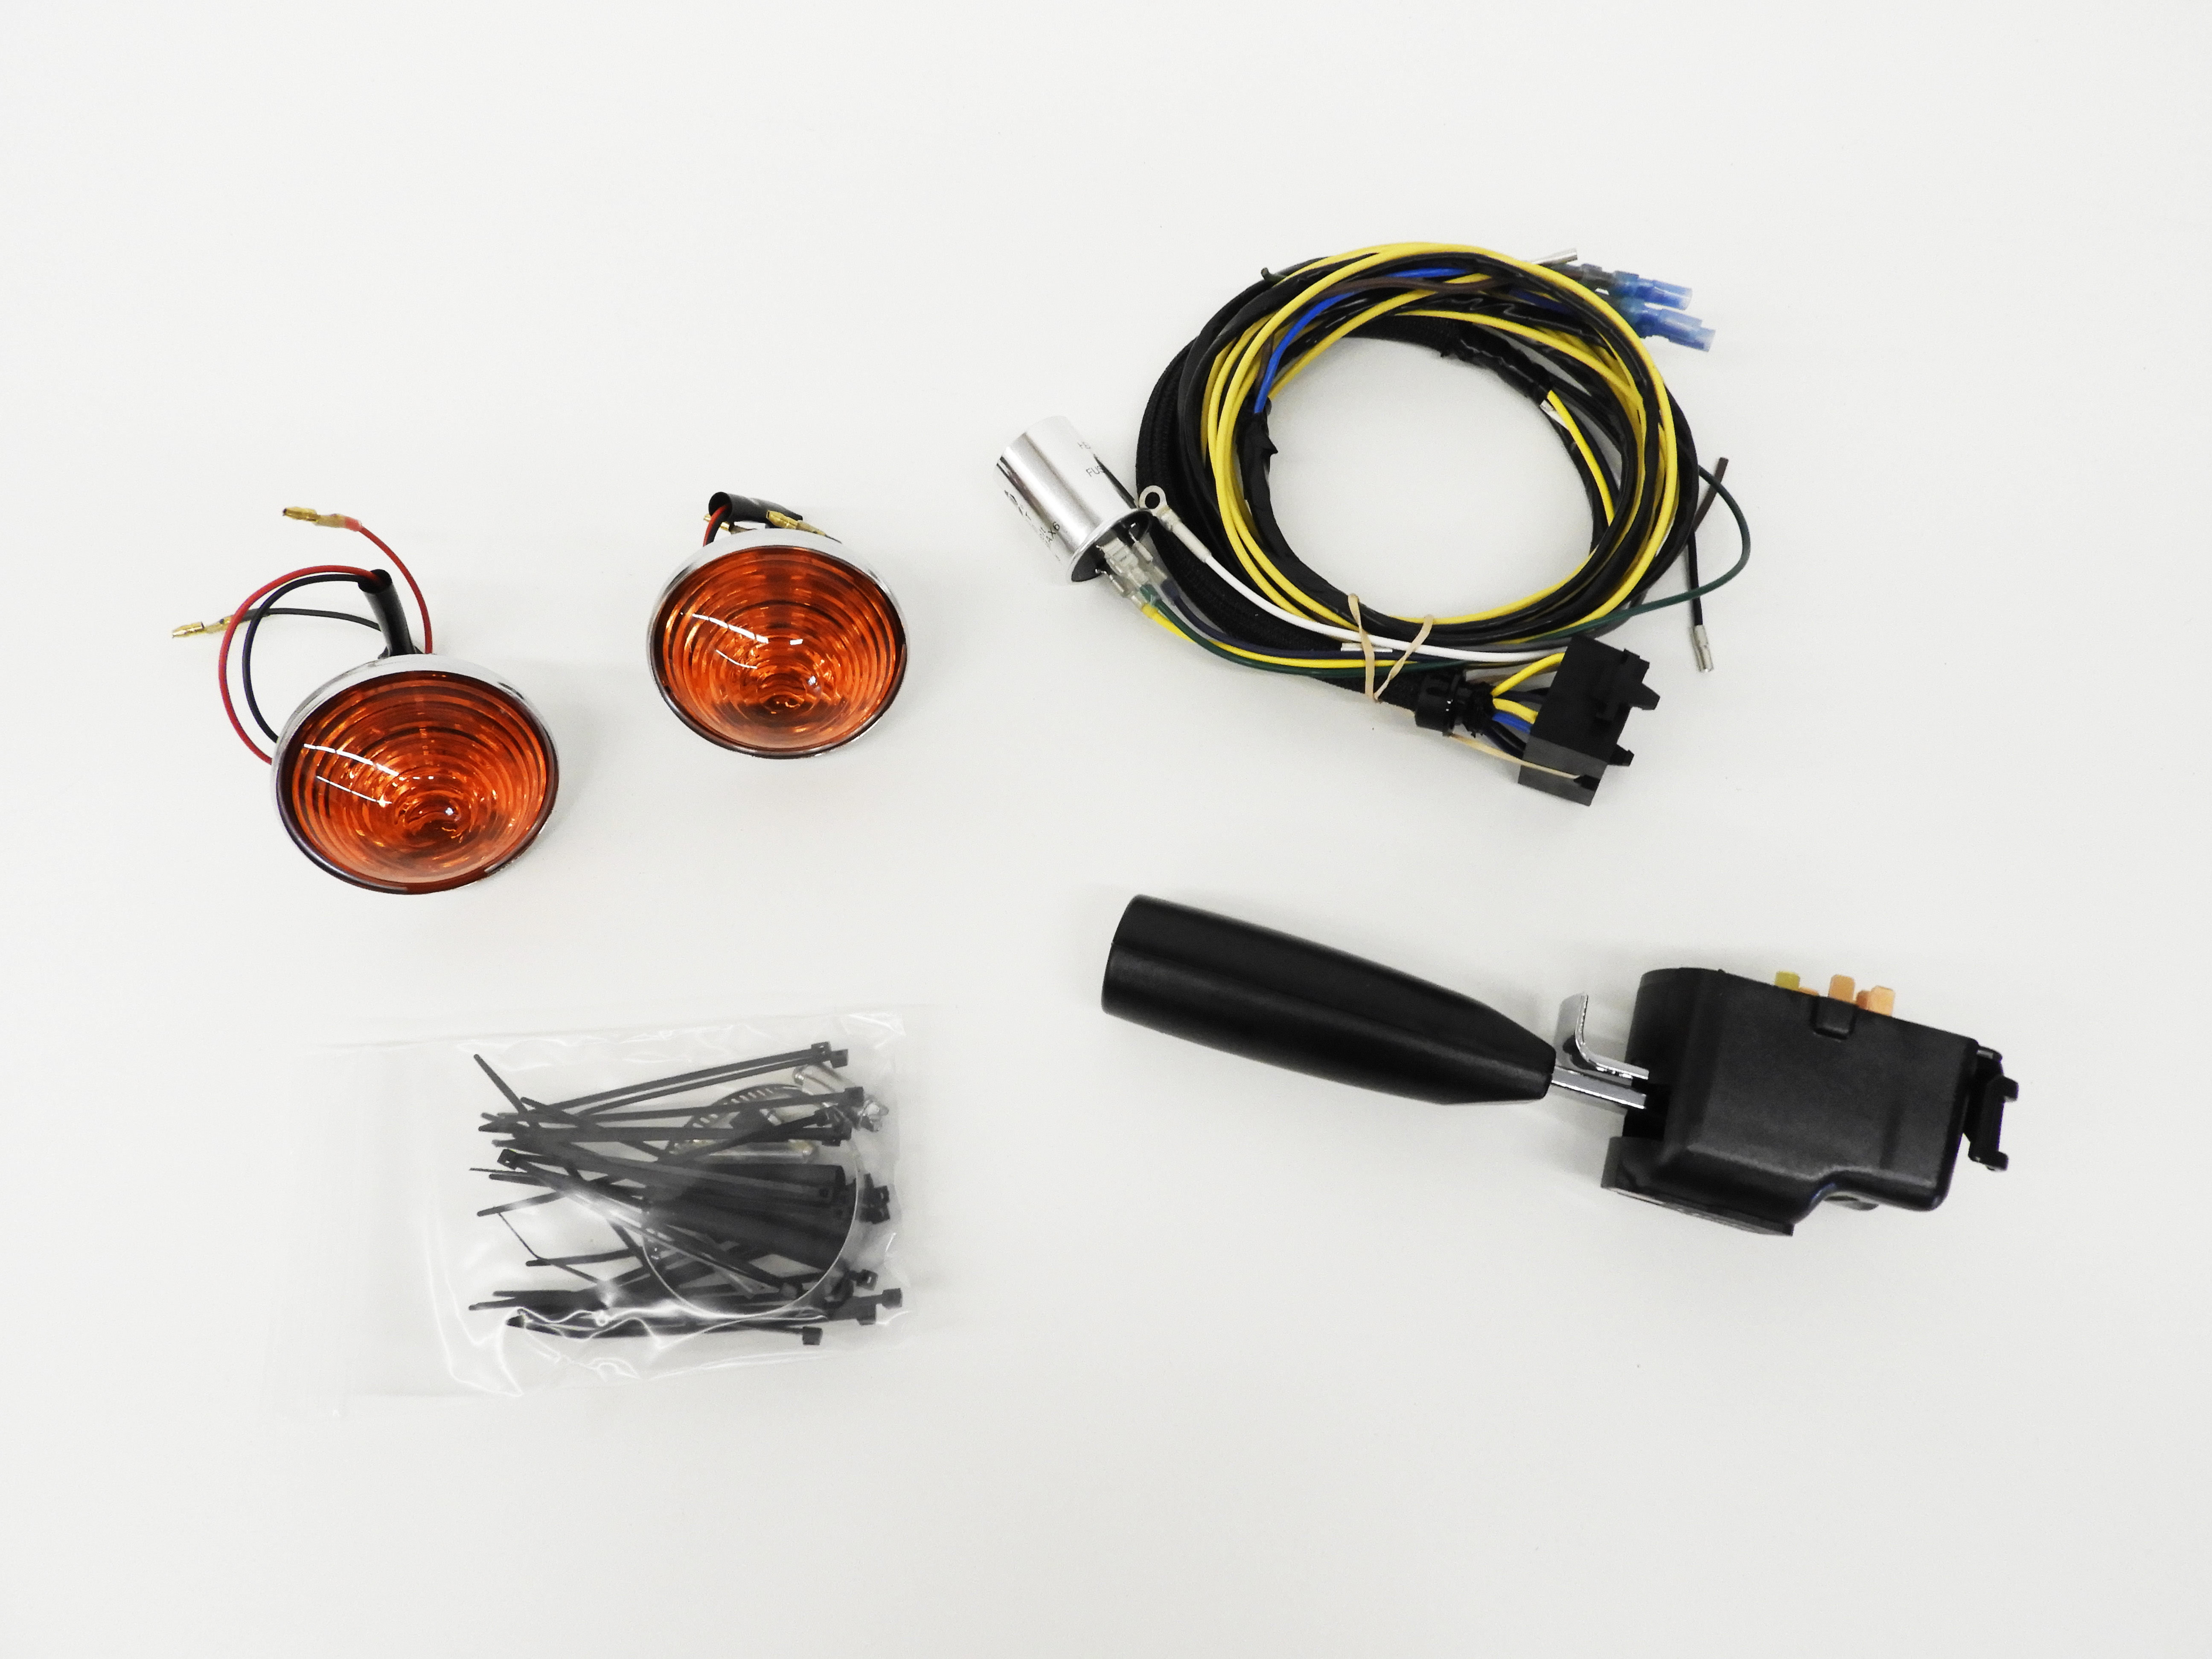 Product image for Roxor Turn Signal Harness Conversion